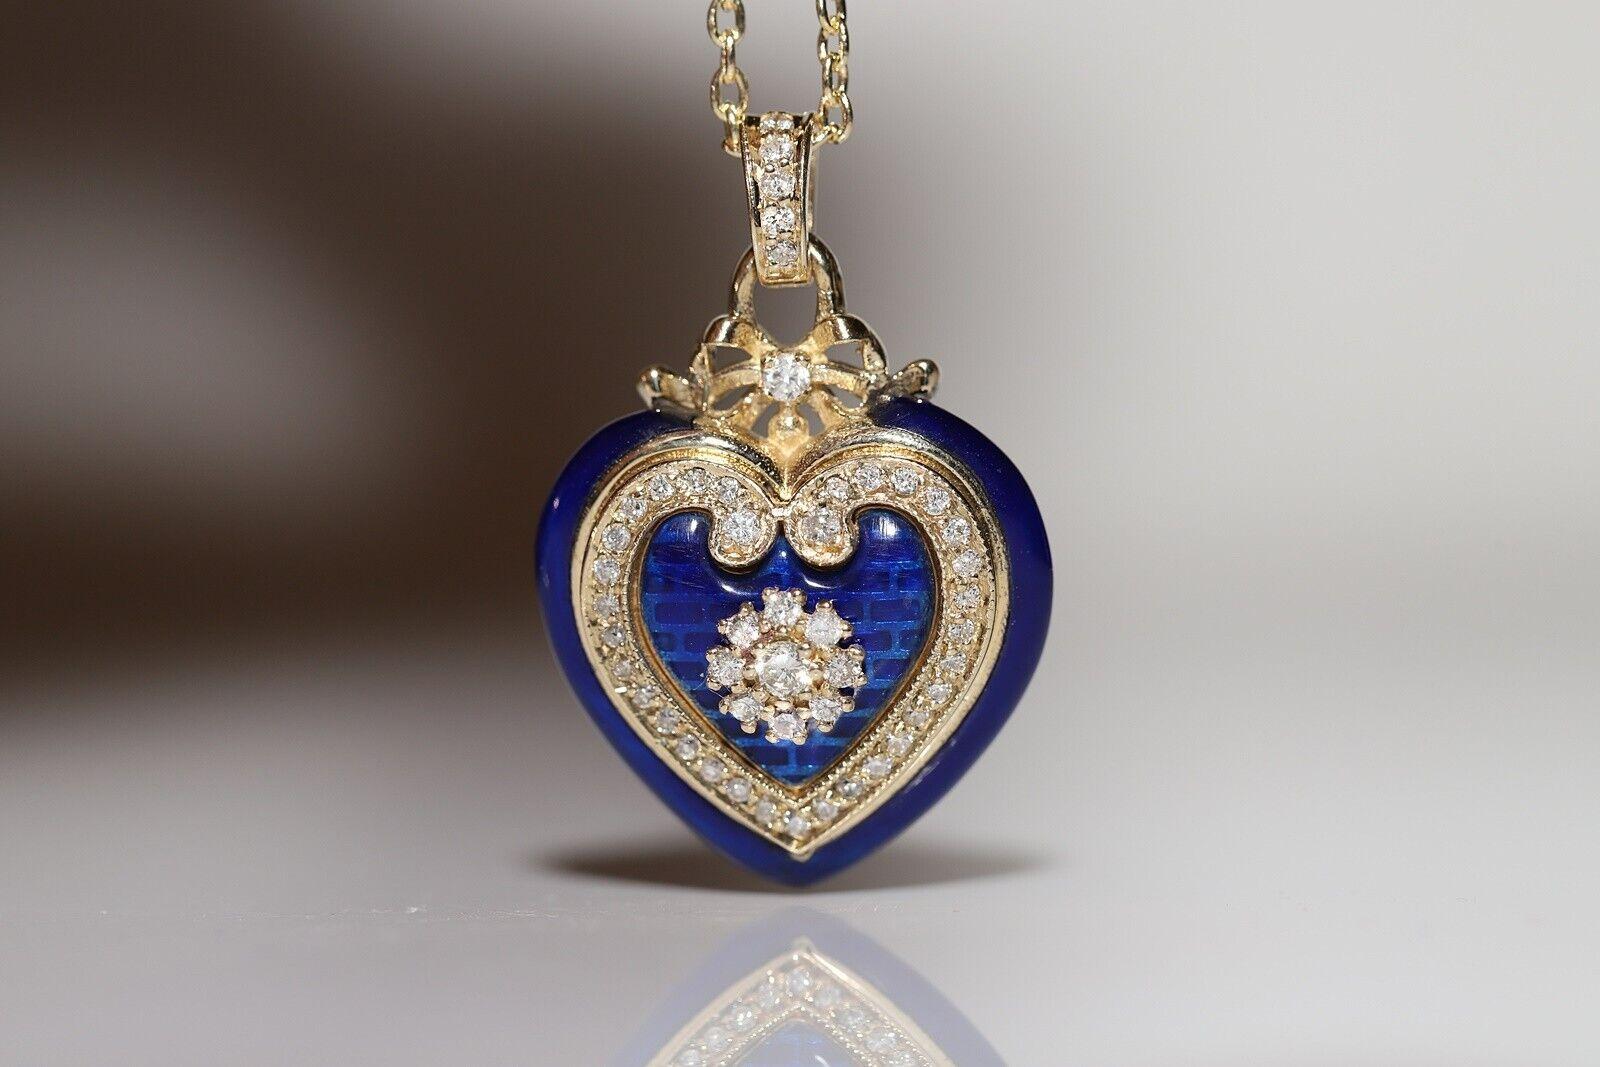 New Made 14k Gold Natural Diamond And Enamel Decorated Heart Pendant Necklace For Sale 6